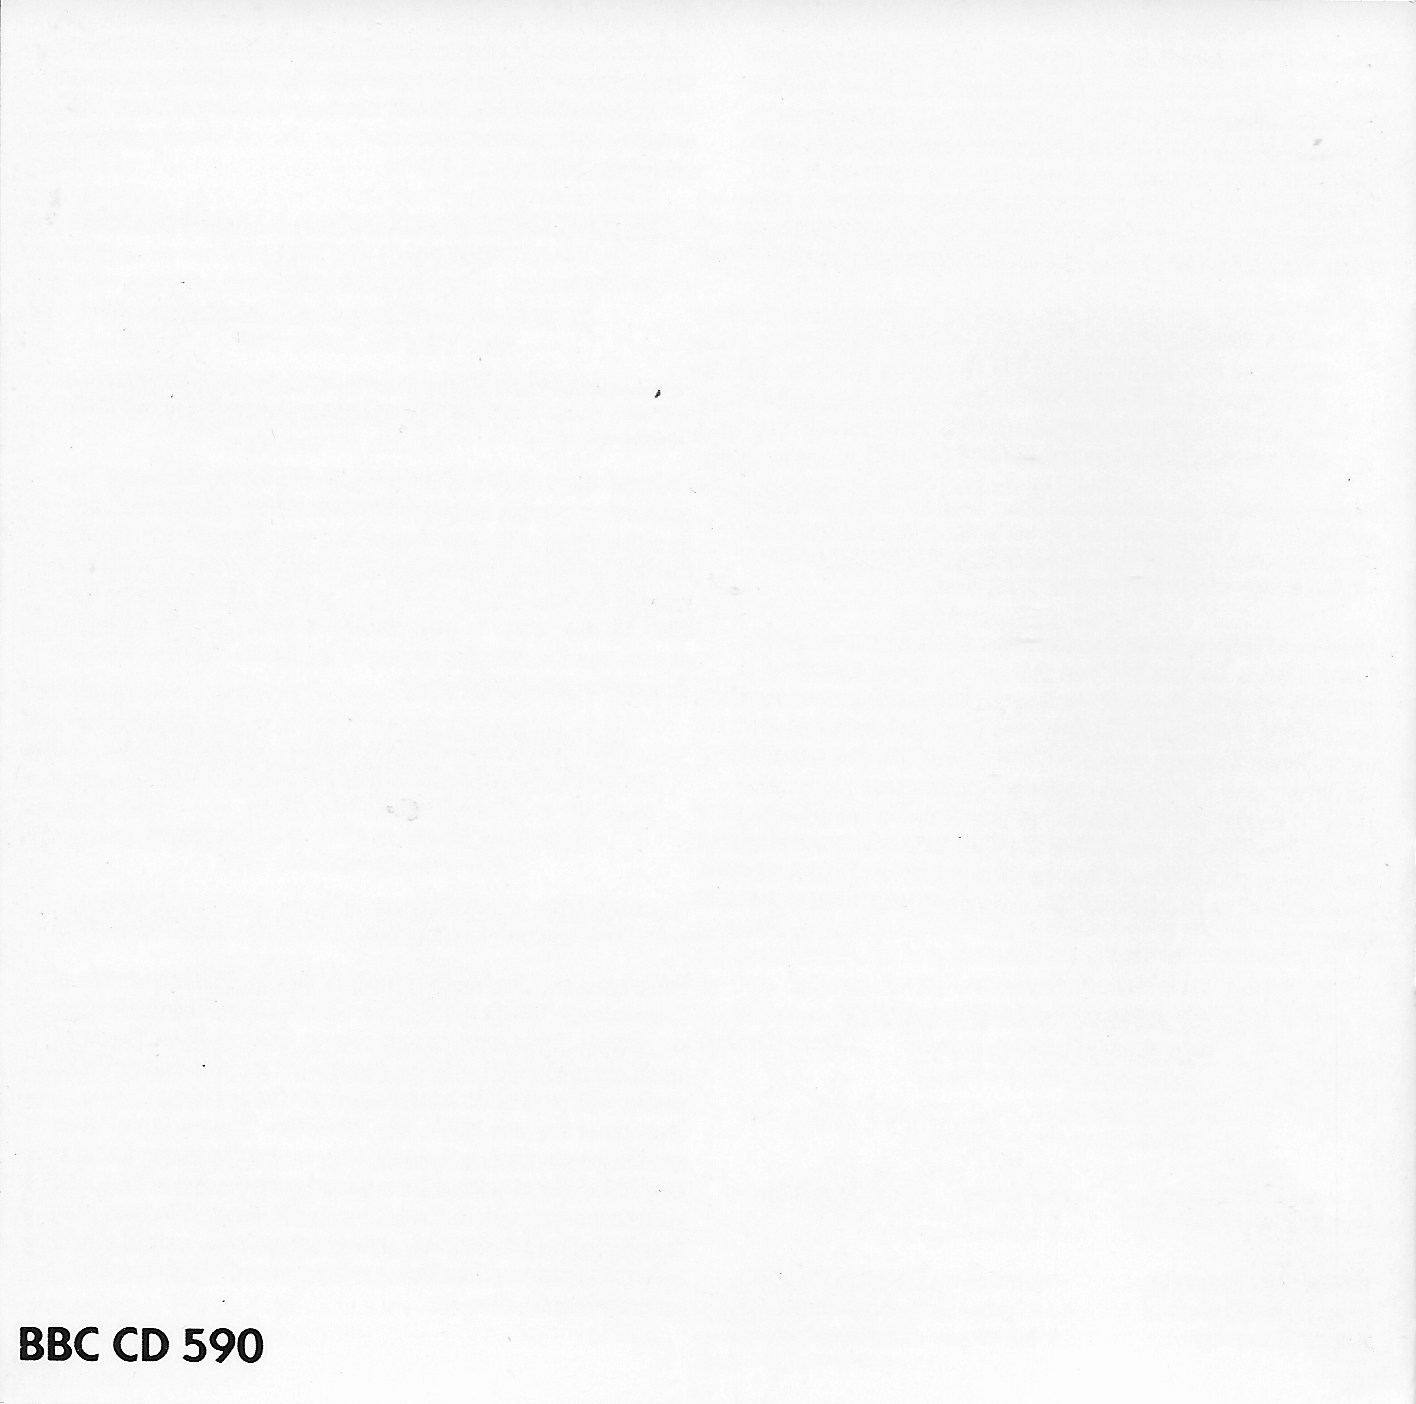 Middle of cover of BBCCD590